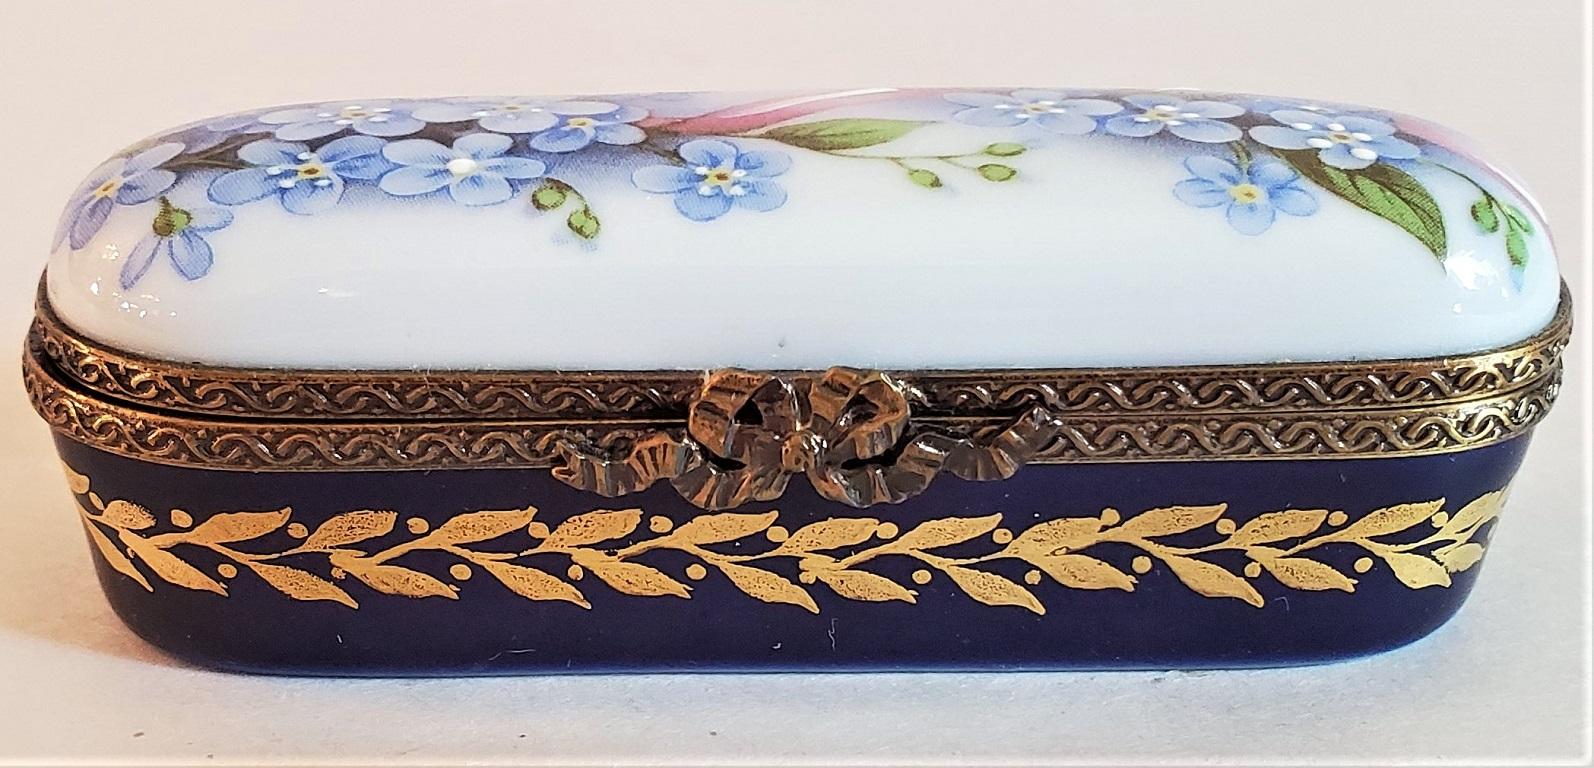 Presenting a lovely and exceptionally cute and quality vintage fontanille marraud Limoges trinket box.

Made in Limoges, France circa 1930.

Marked on base as “Limoges France … Porcelaine Artisque F.M Limoges France”.

Hhand